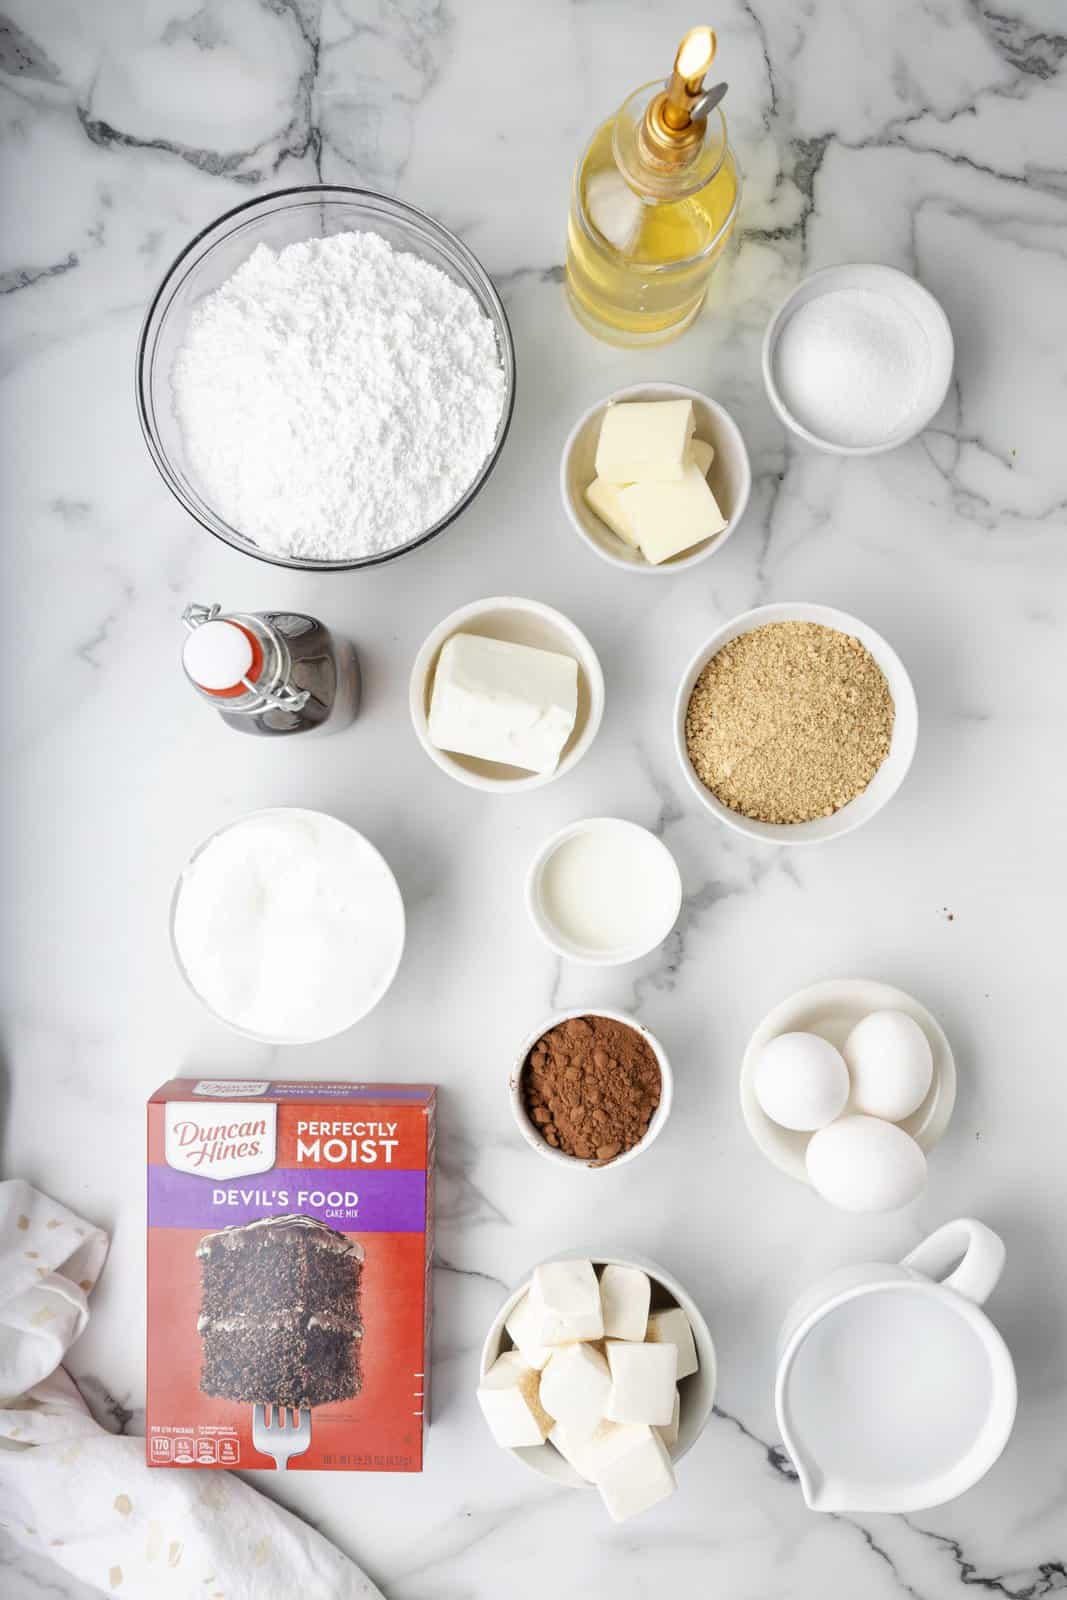 Ingredients needed: graham cracker crumbs, granulated sugar, butter, chocolate cake mix, ingredients to make cake mix, salted butter, shortening, marshmallow fluff, powdered sugar, cocoa powder, milk, vanilla extract and marshmallows.